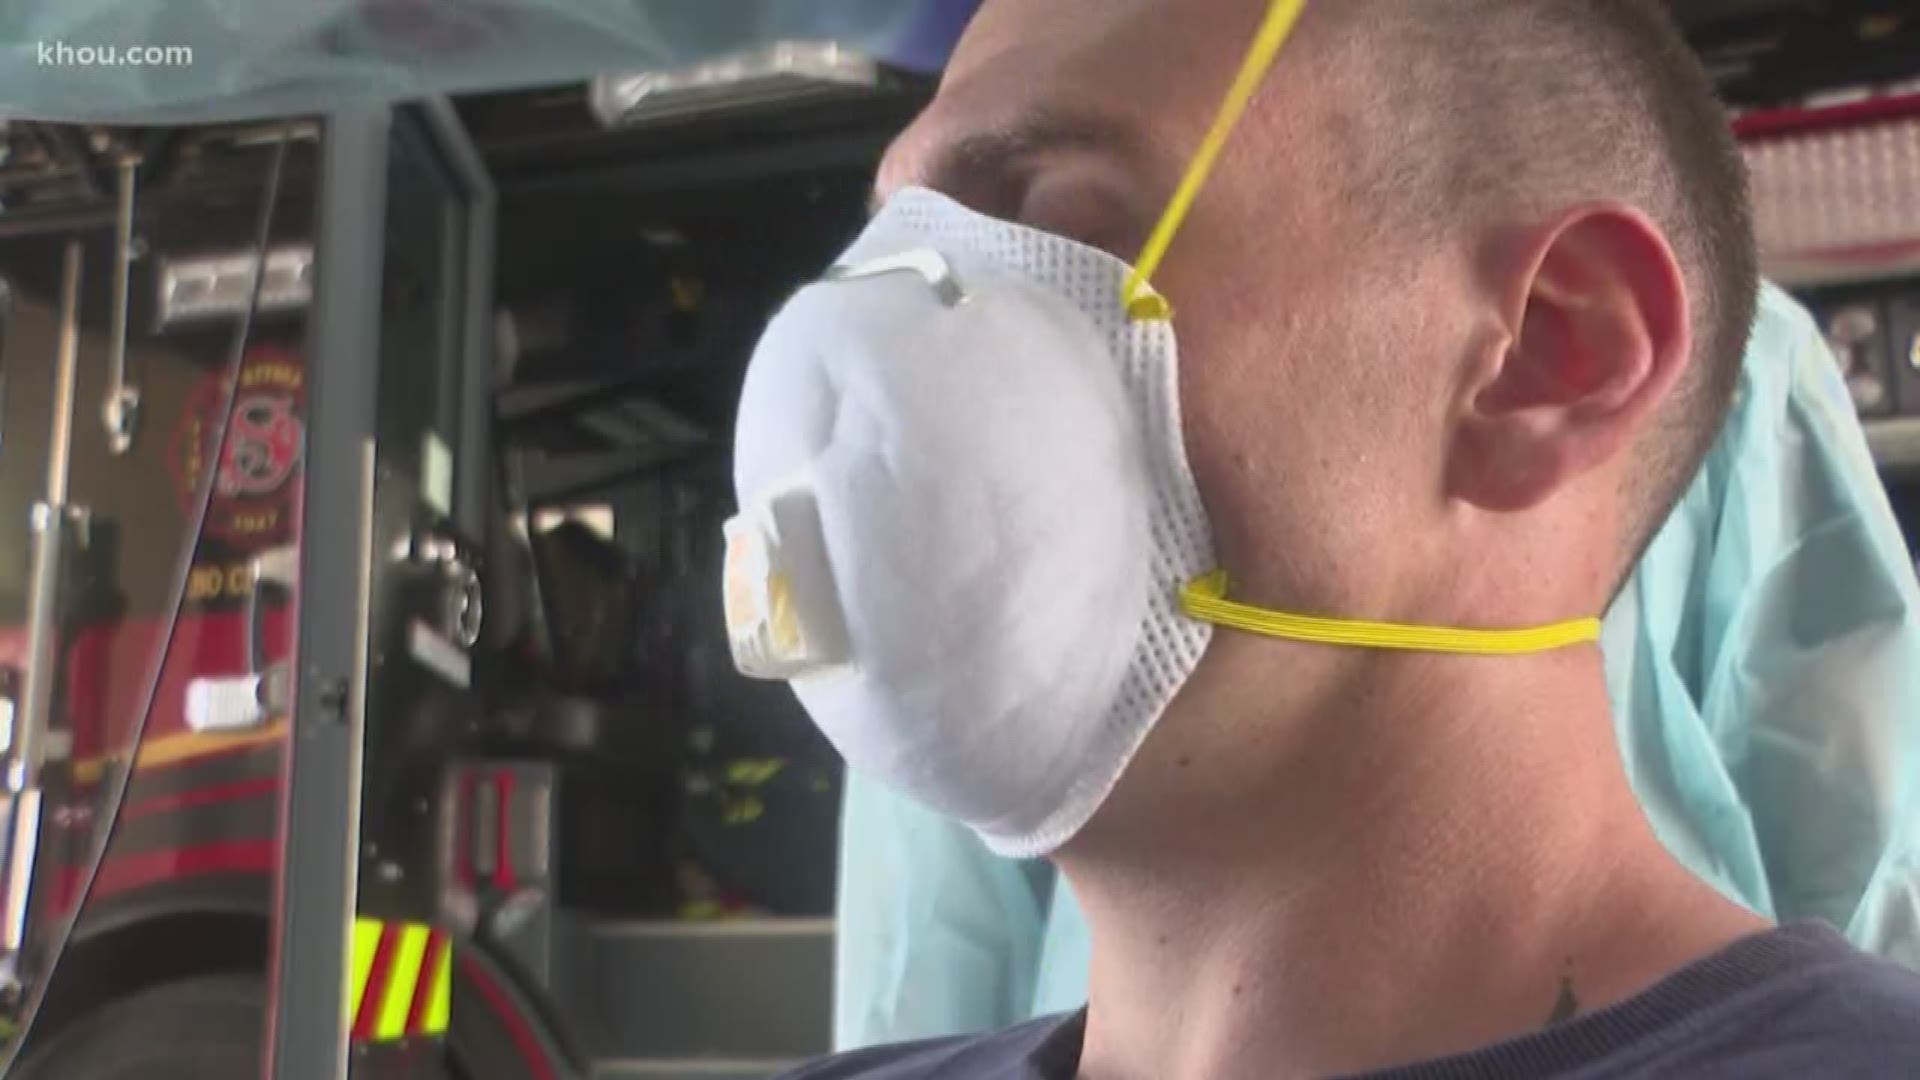 When firefighters get a medical call, they have to be prepared for anything.